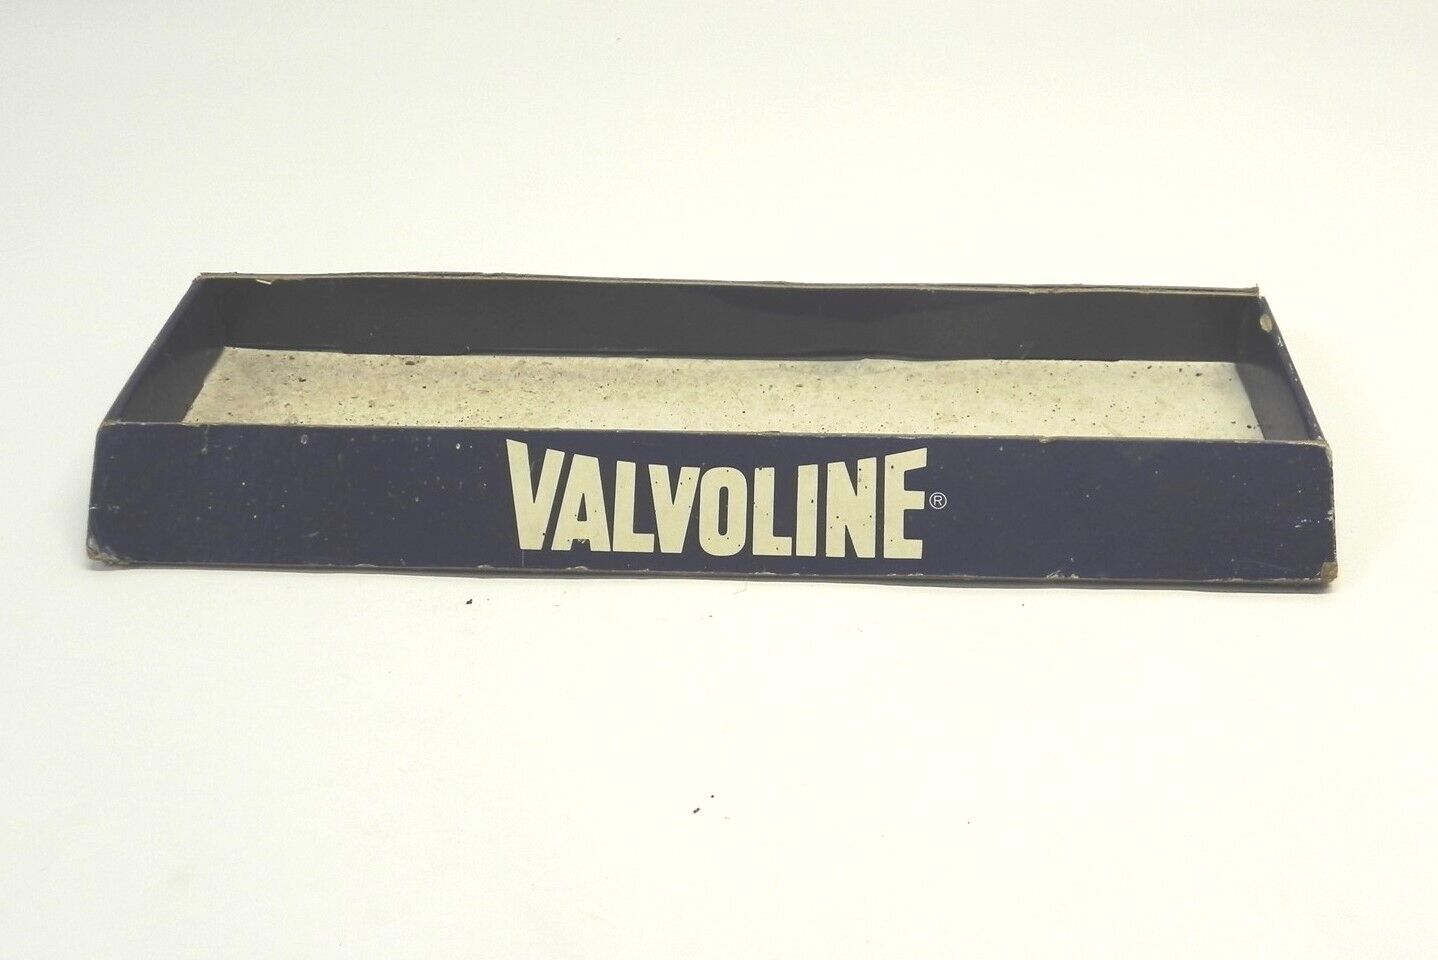 VINTAGE VALVOLINE STORE COUNTERTOP CARDBOARD 4 CAN DISPLAY HOLDER PRE-OWNED USED